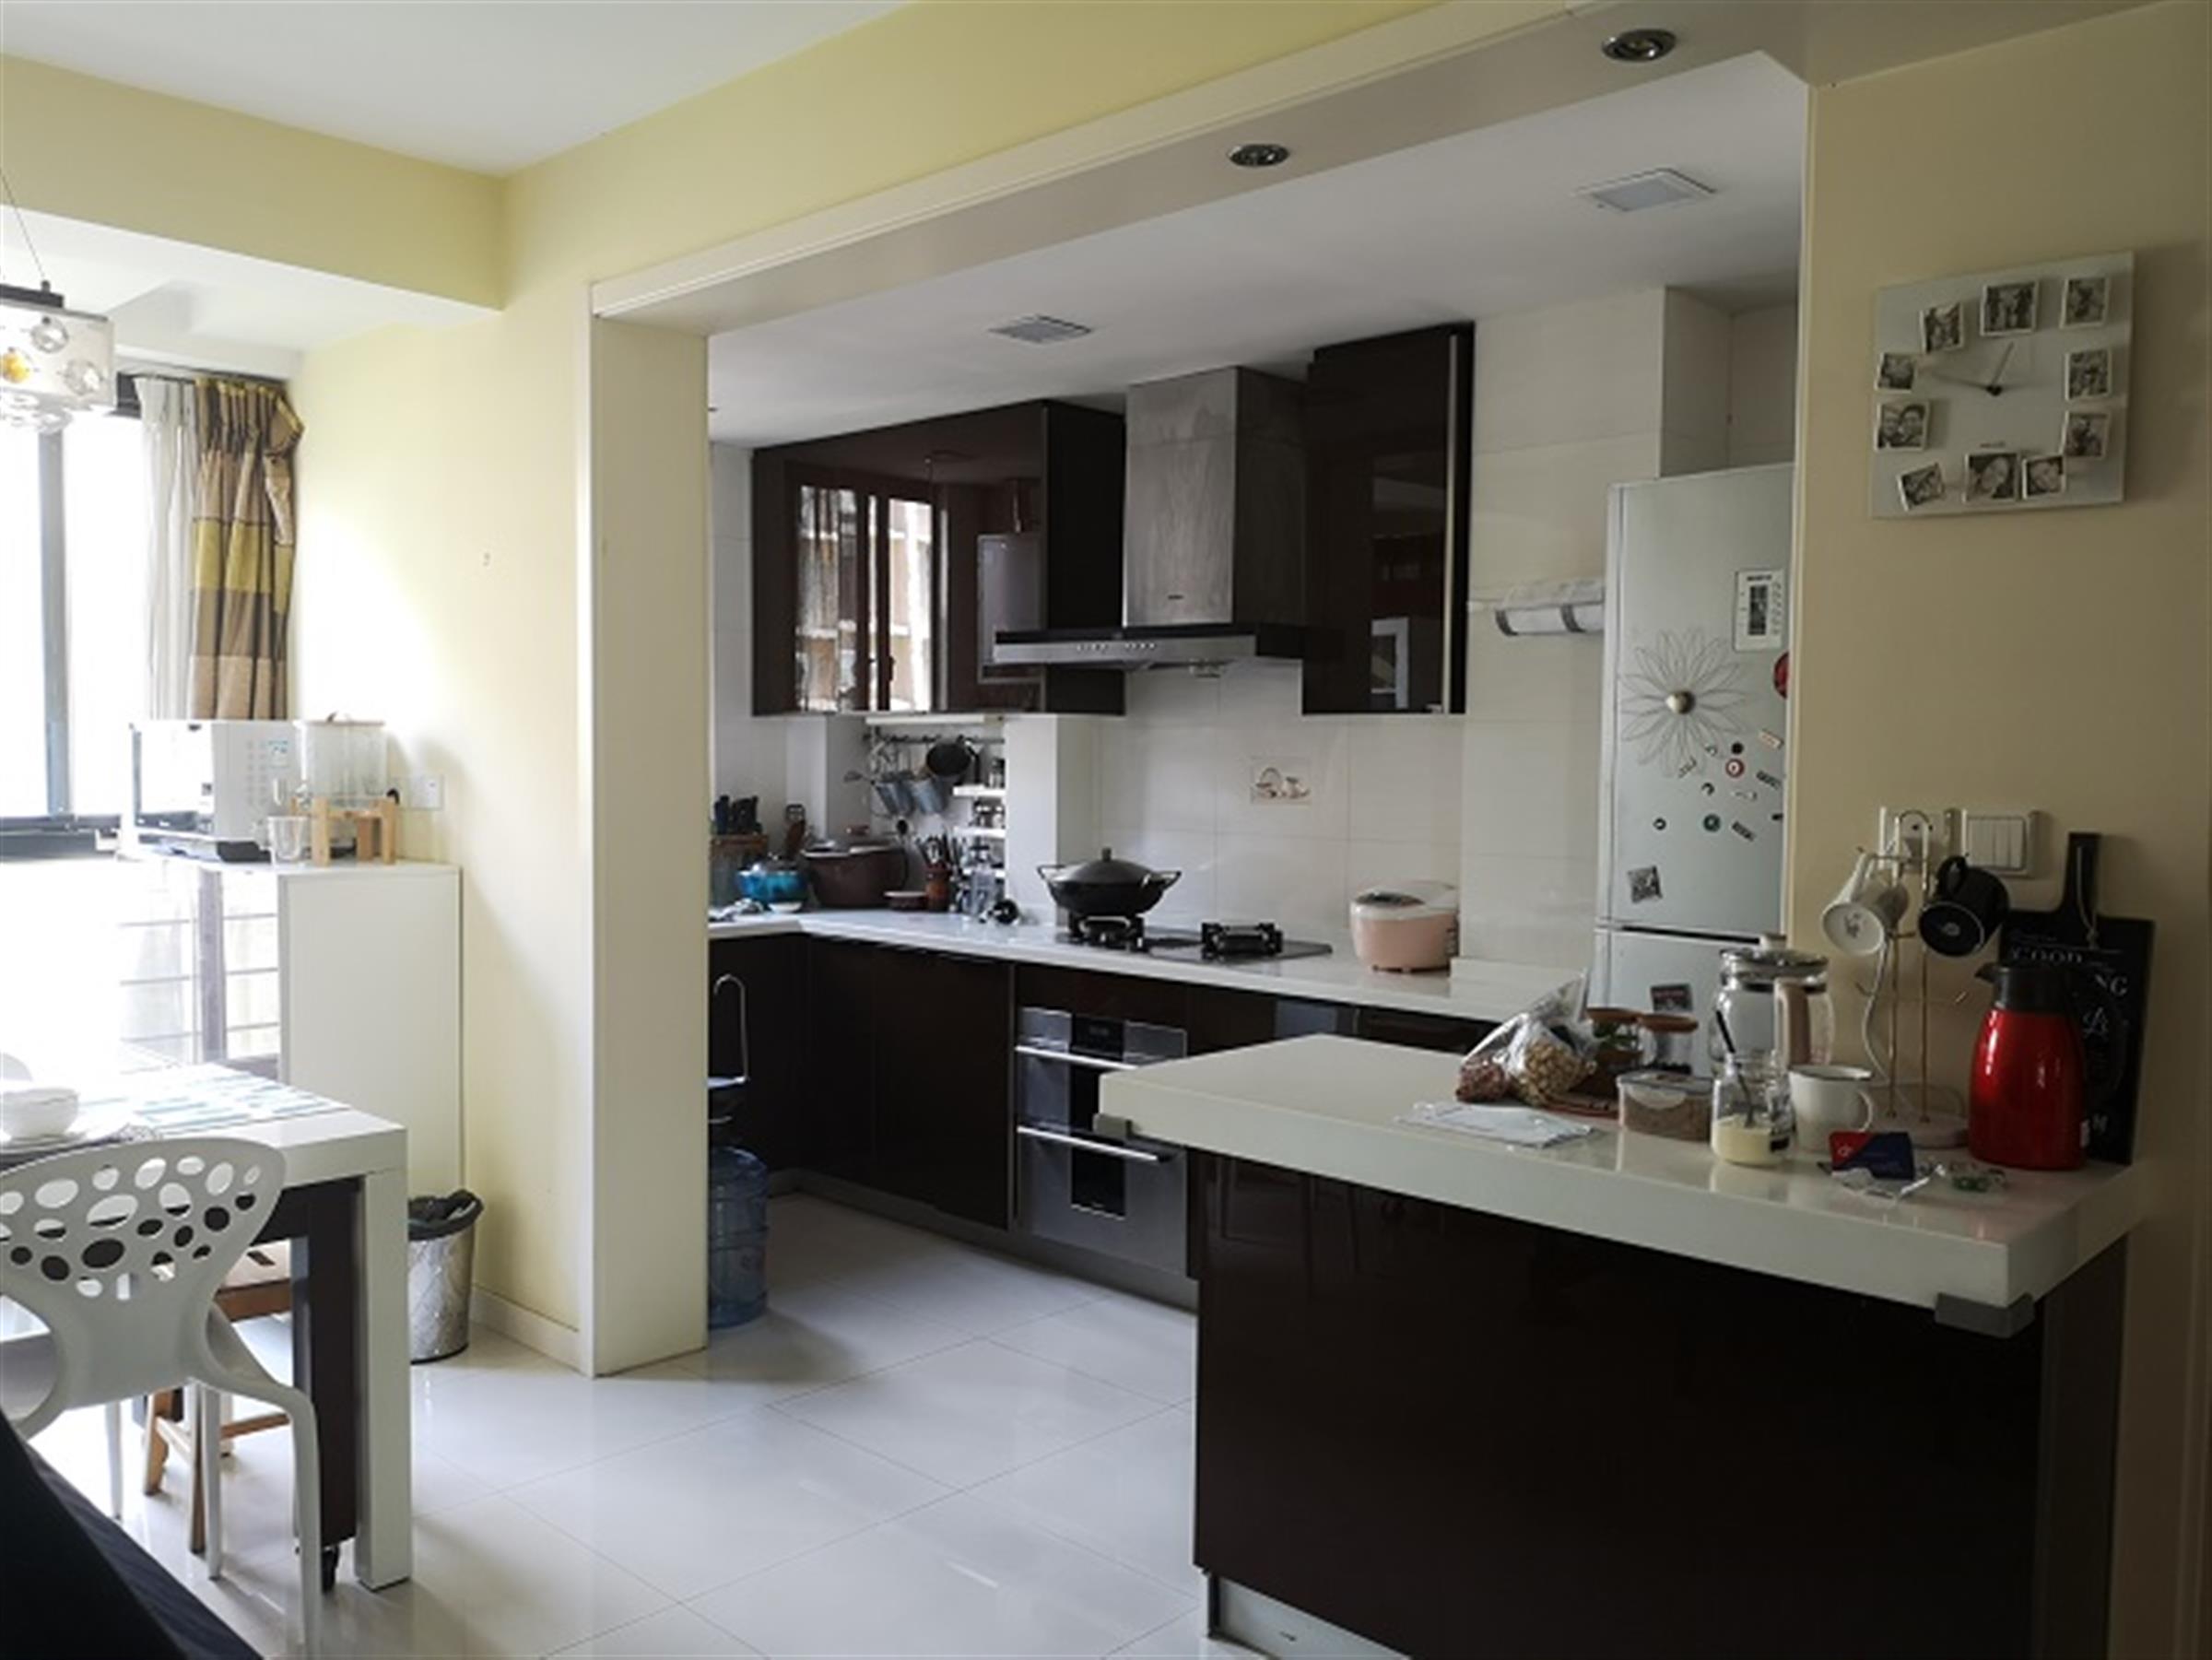 Open Kitchen Quiet Fresh Air among Treetops nr Shanghai Zoo w Spacious Bright Apt for Rent